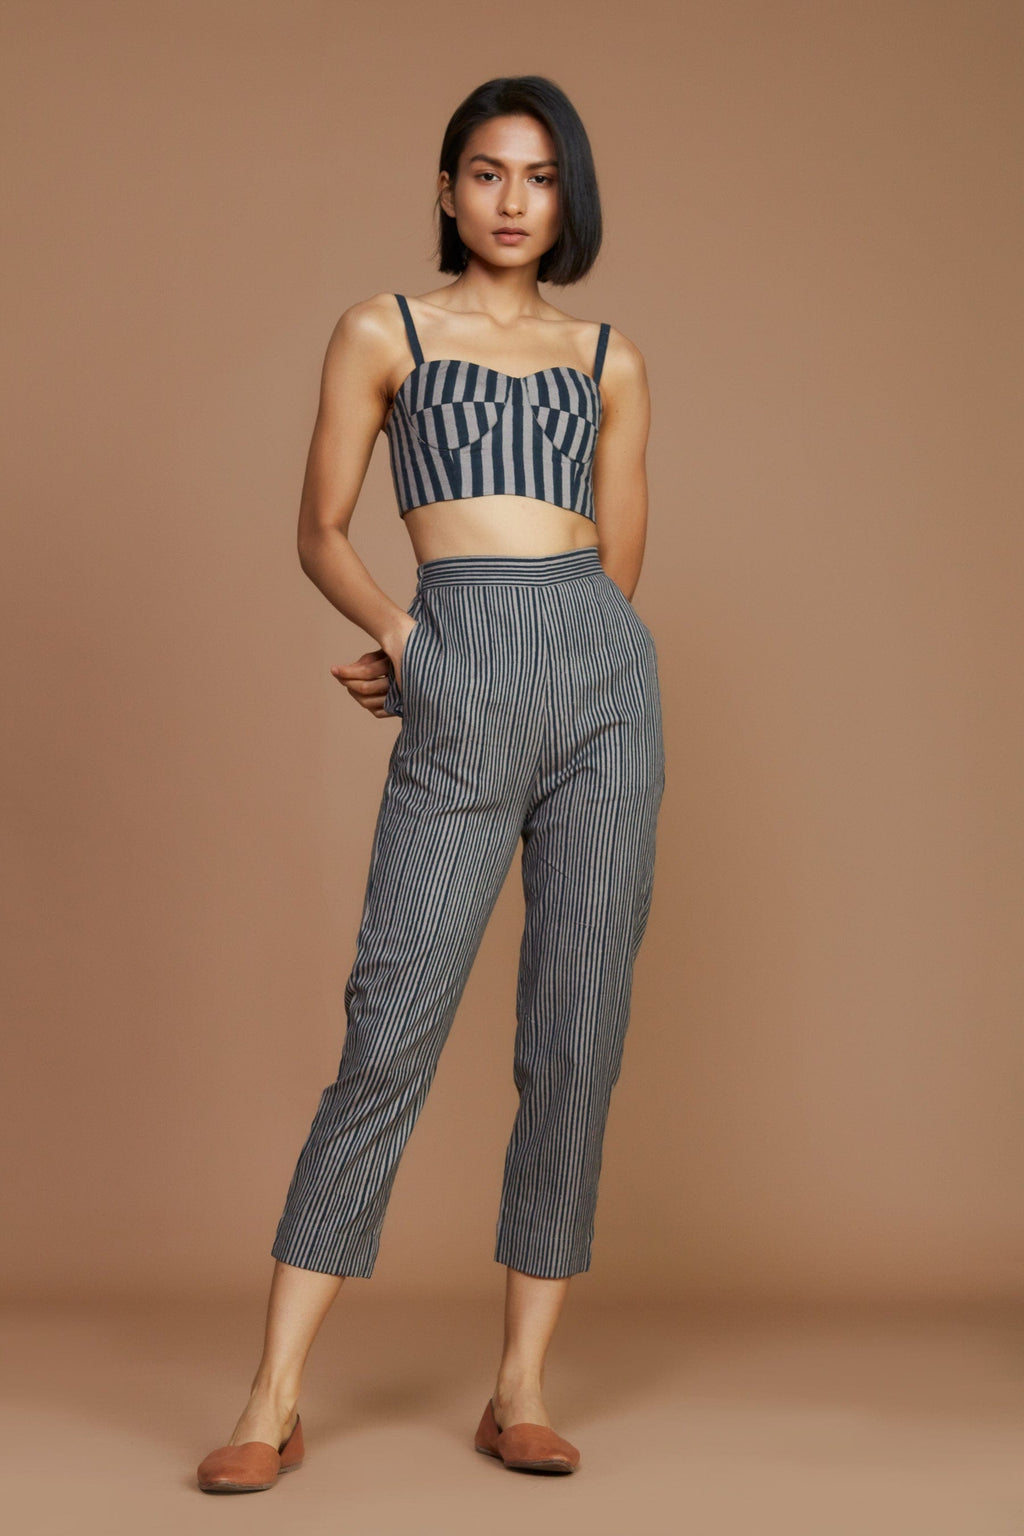 https://cdn.shopify.com/s/files/1/0888/5432/products/mati-outfit-sets-grey-with-charcoal-striped-corset-pant-co-ord-set-2-pcs-29181630644313_1024x.jpg?v=1647240592